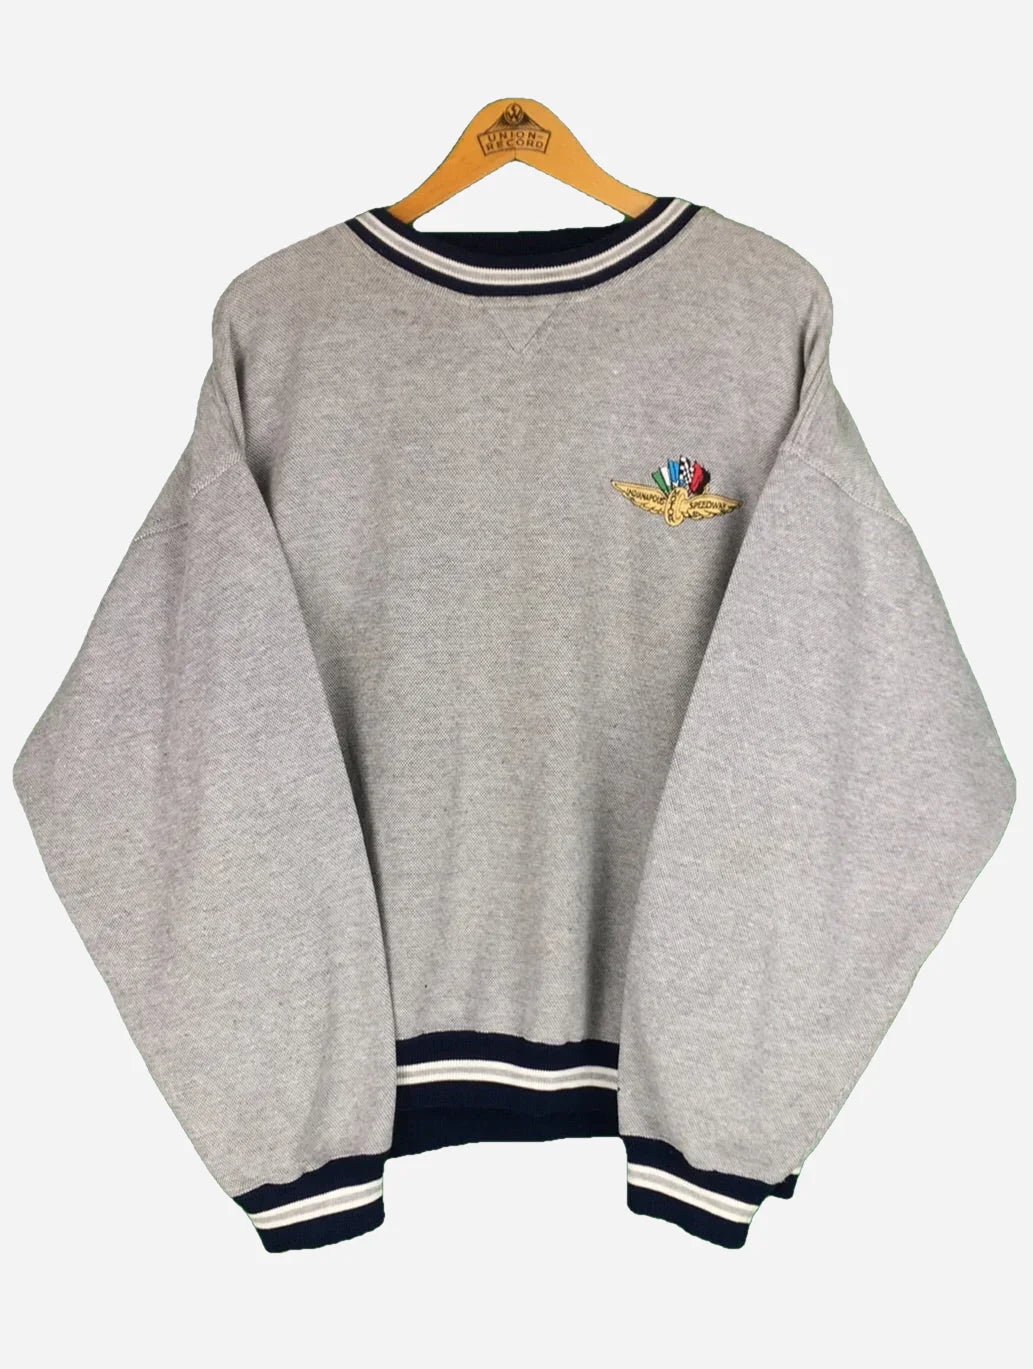 „Indianapolis Speedway“ Sweater (L)